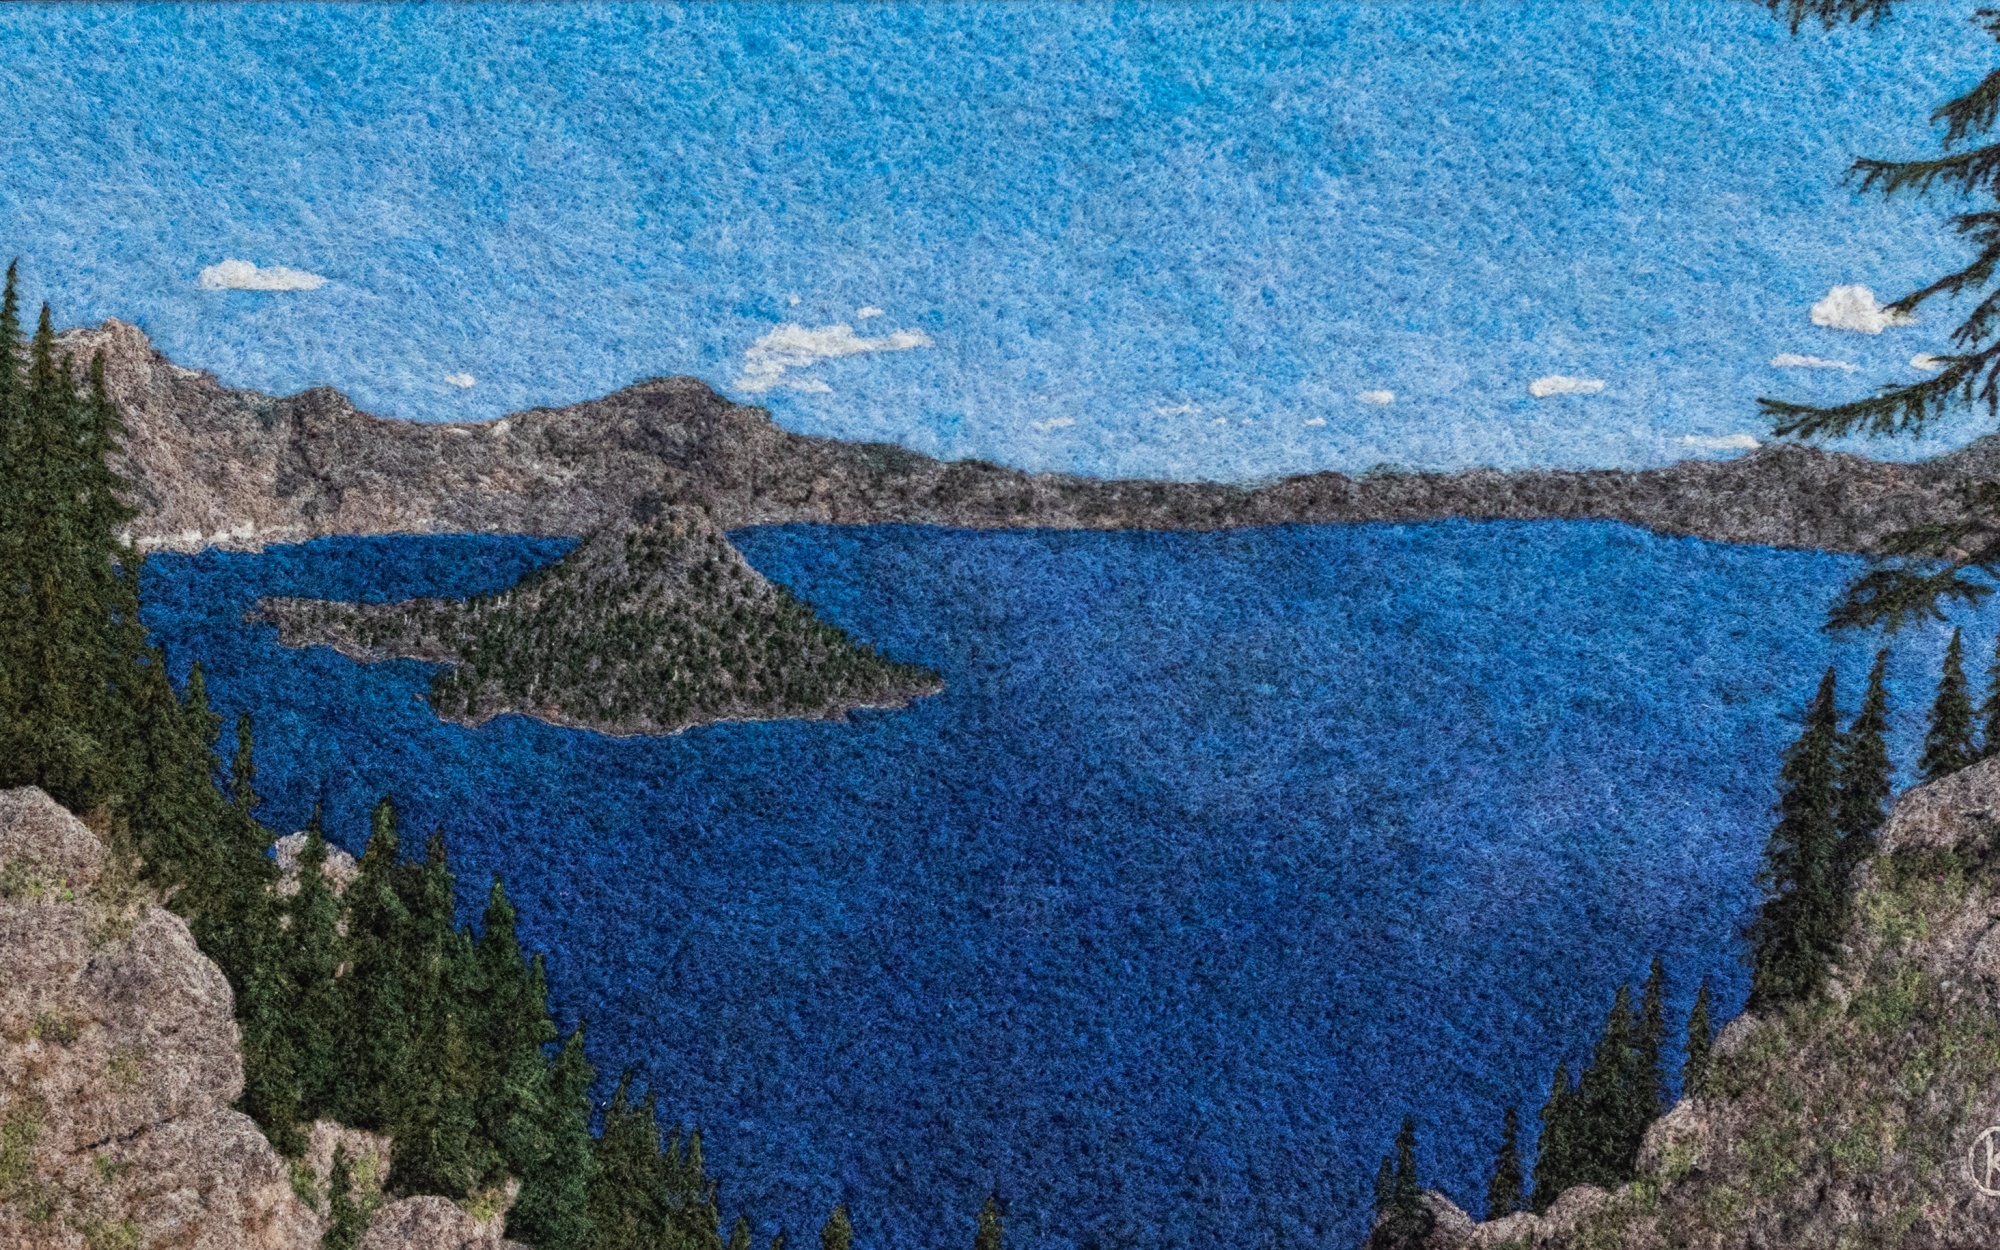 A two-dimensional felted wool landscape of a blue lake rimmed by mountains.